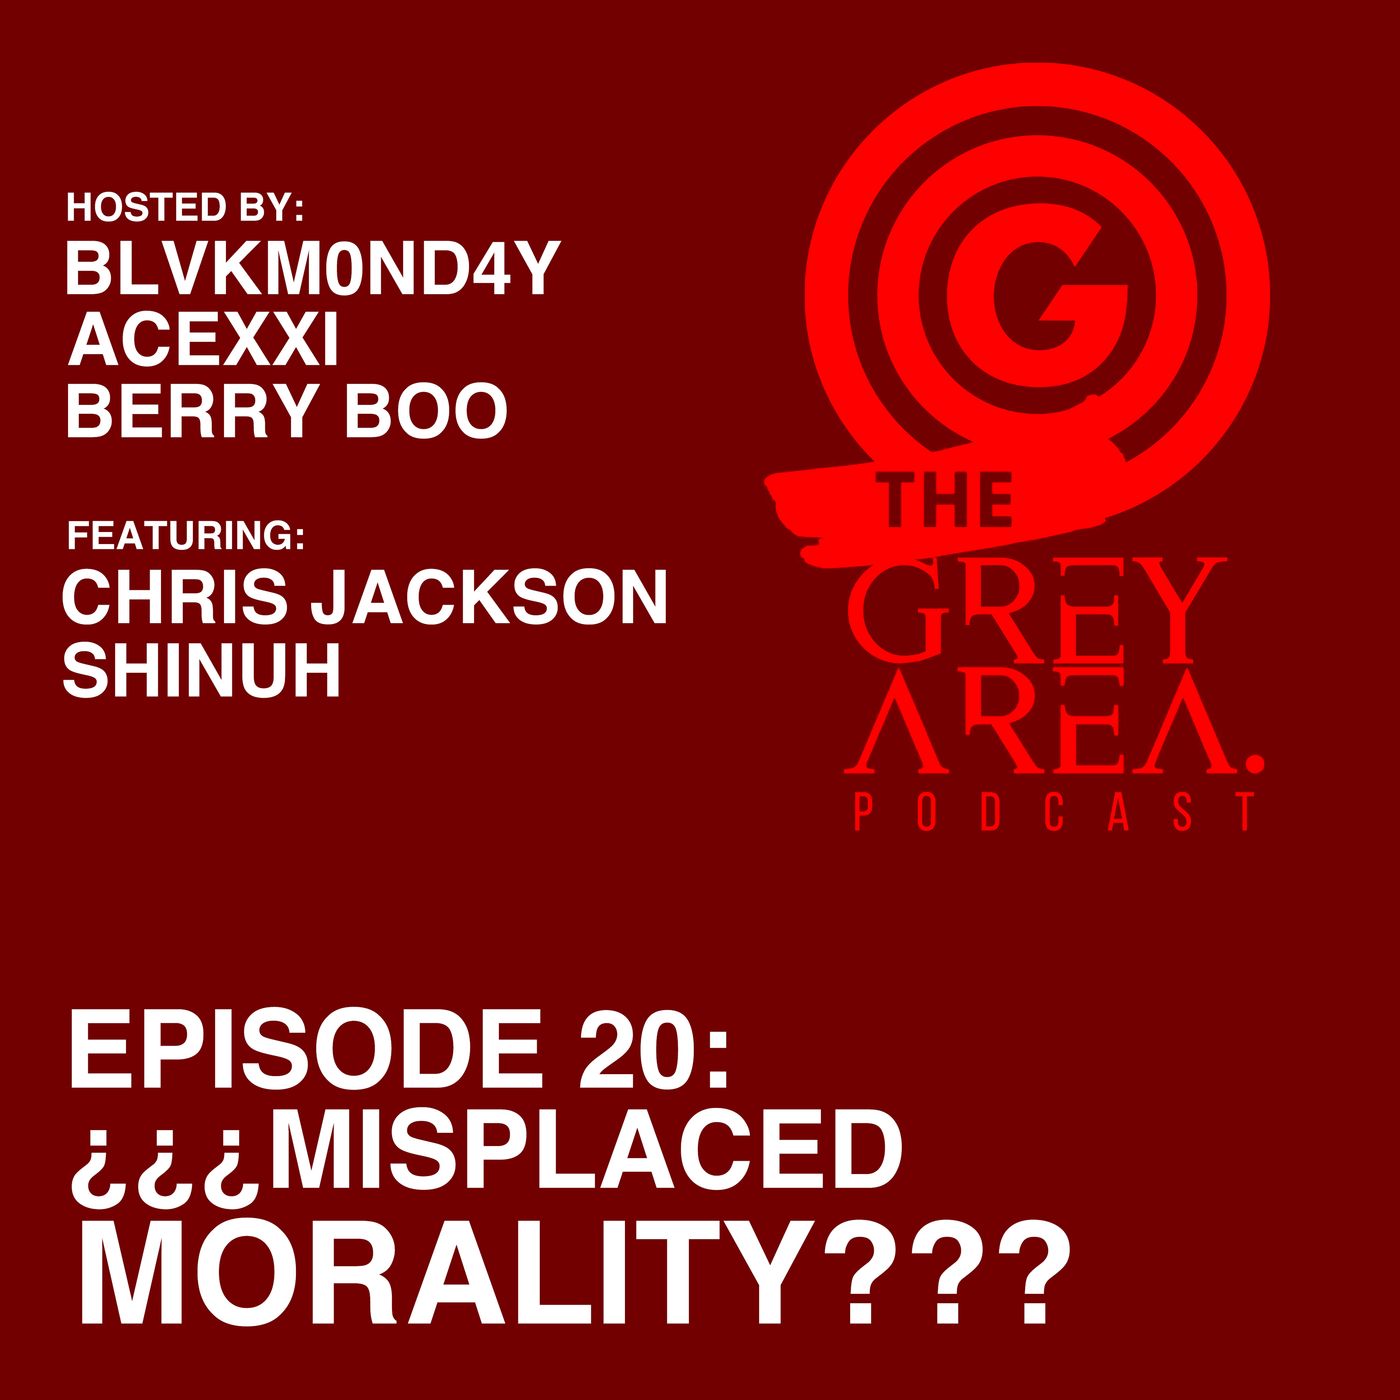 GreyArea PodCast Episode 20: "¿¿¿M!splaced M0rality???"